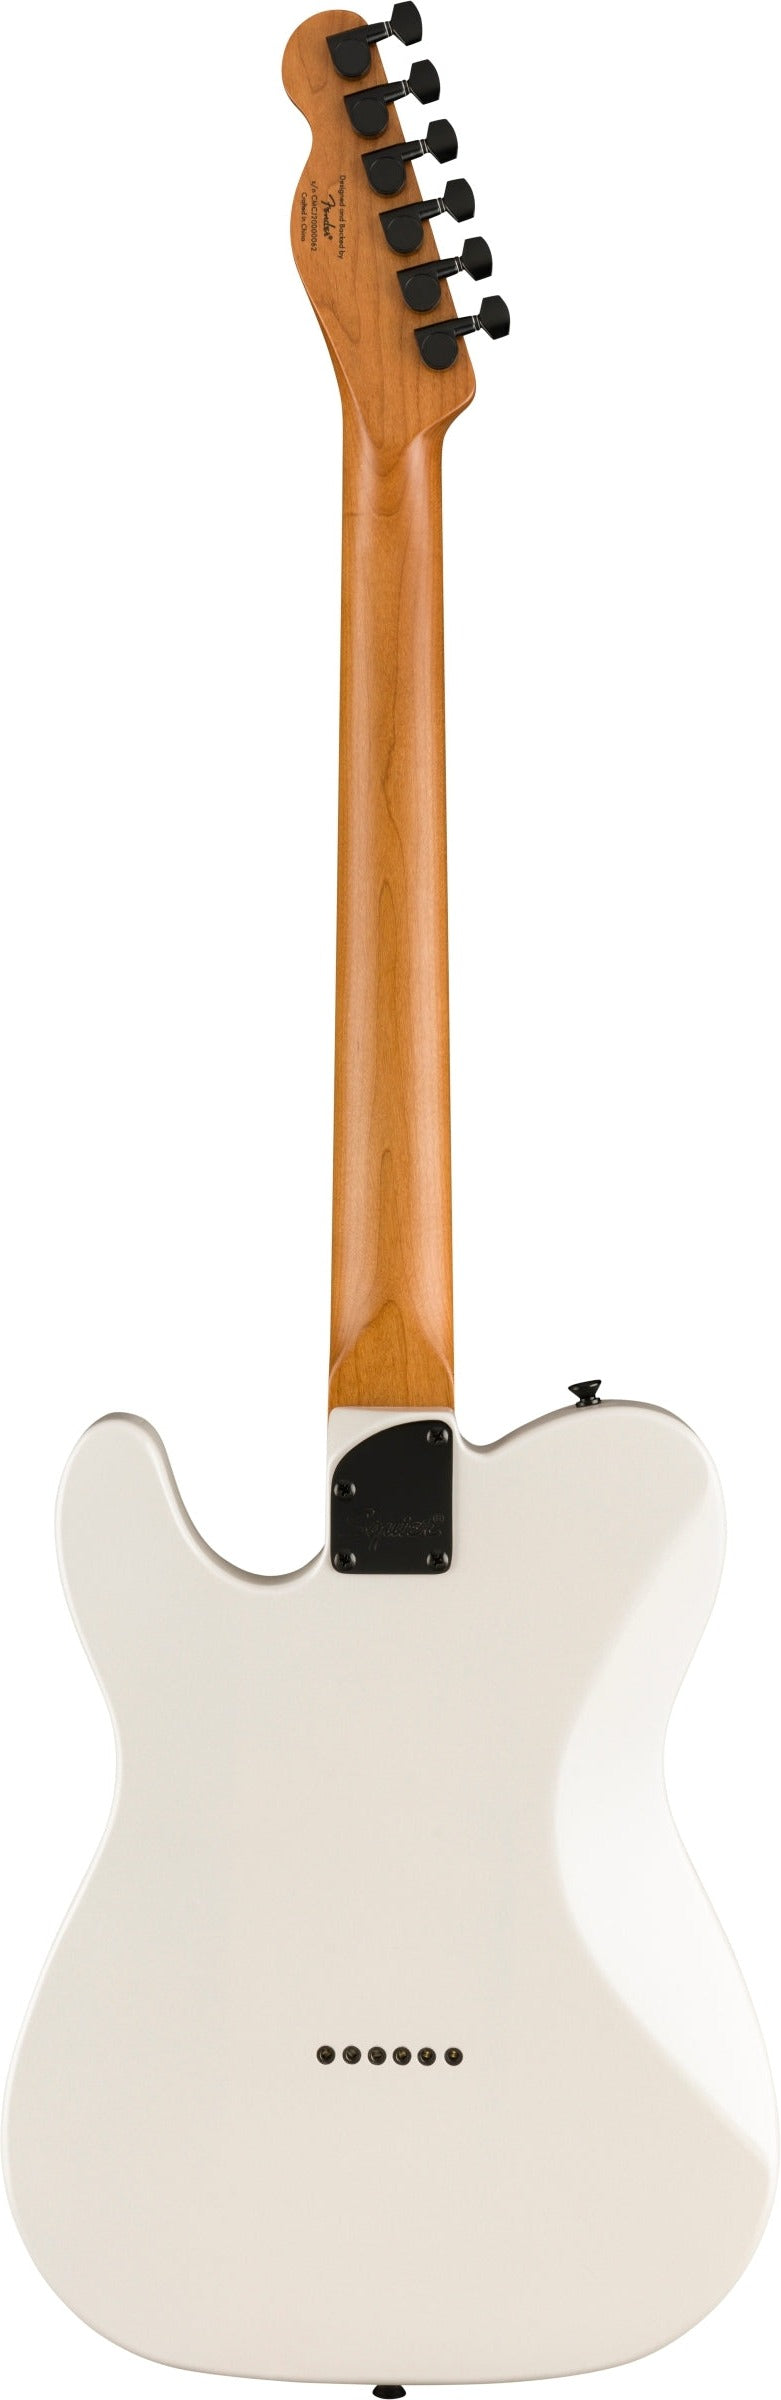 Squier Contemporary Telecaster RH Electric Guitar - Pearl White